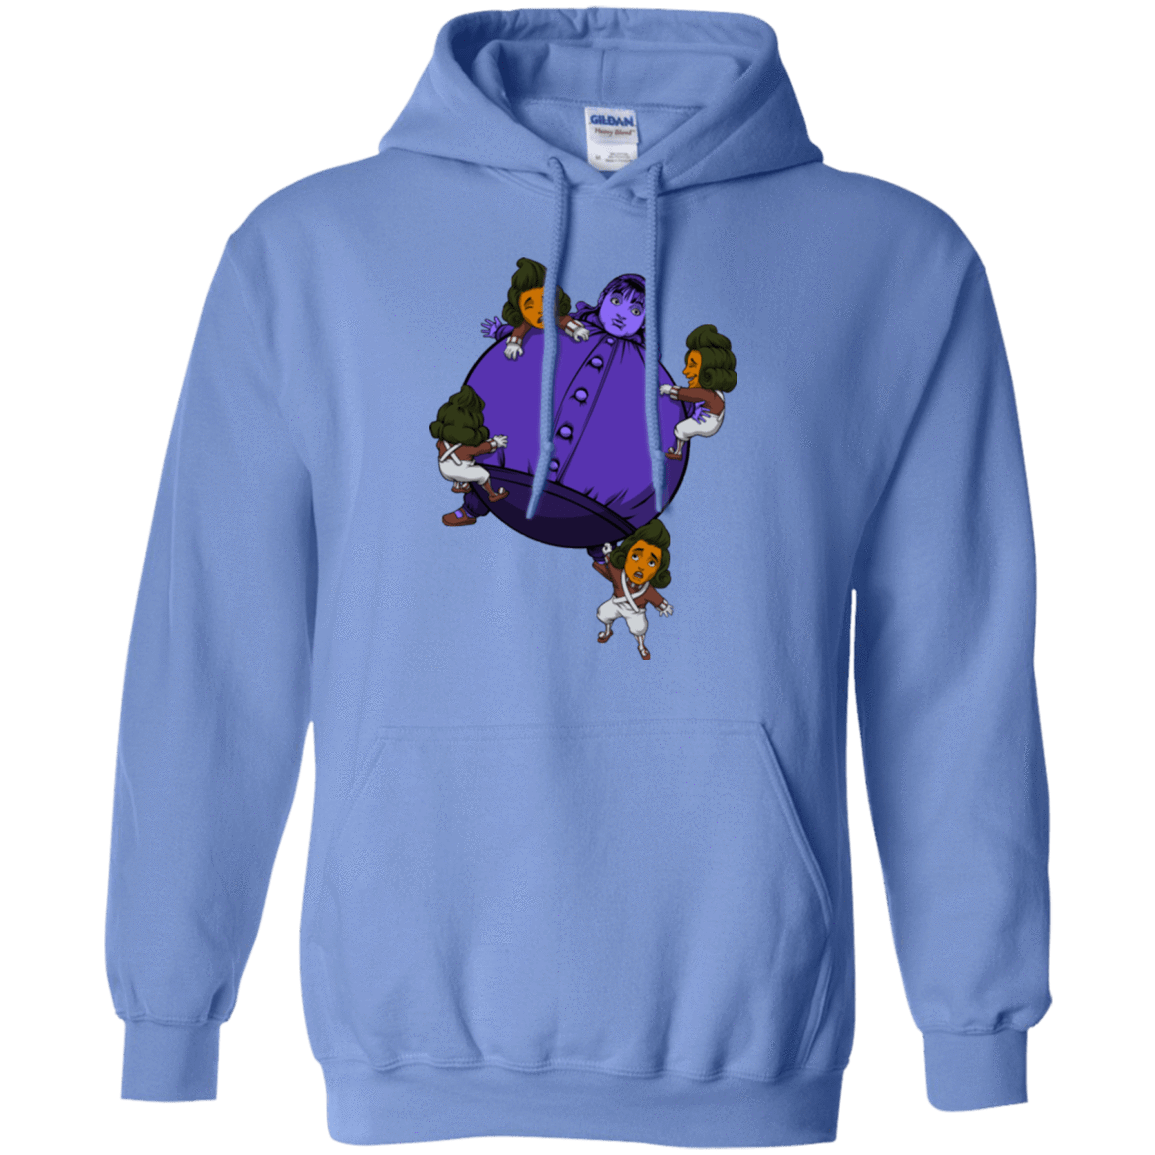 Sweatshirts Carolina Blue / Small Blue In the Face Pullover Hoodie